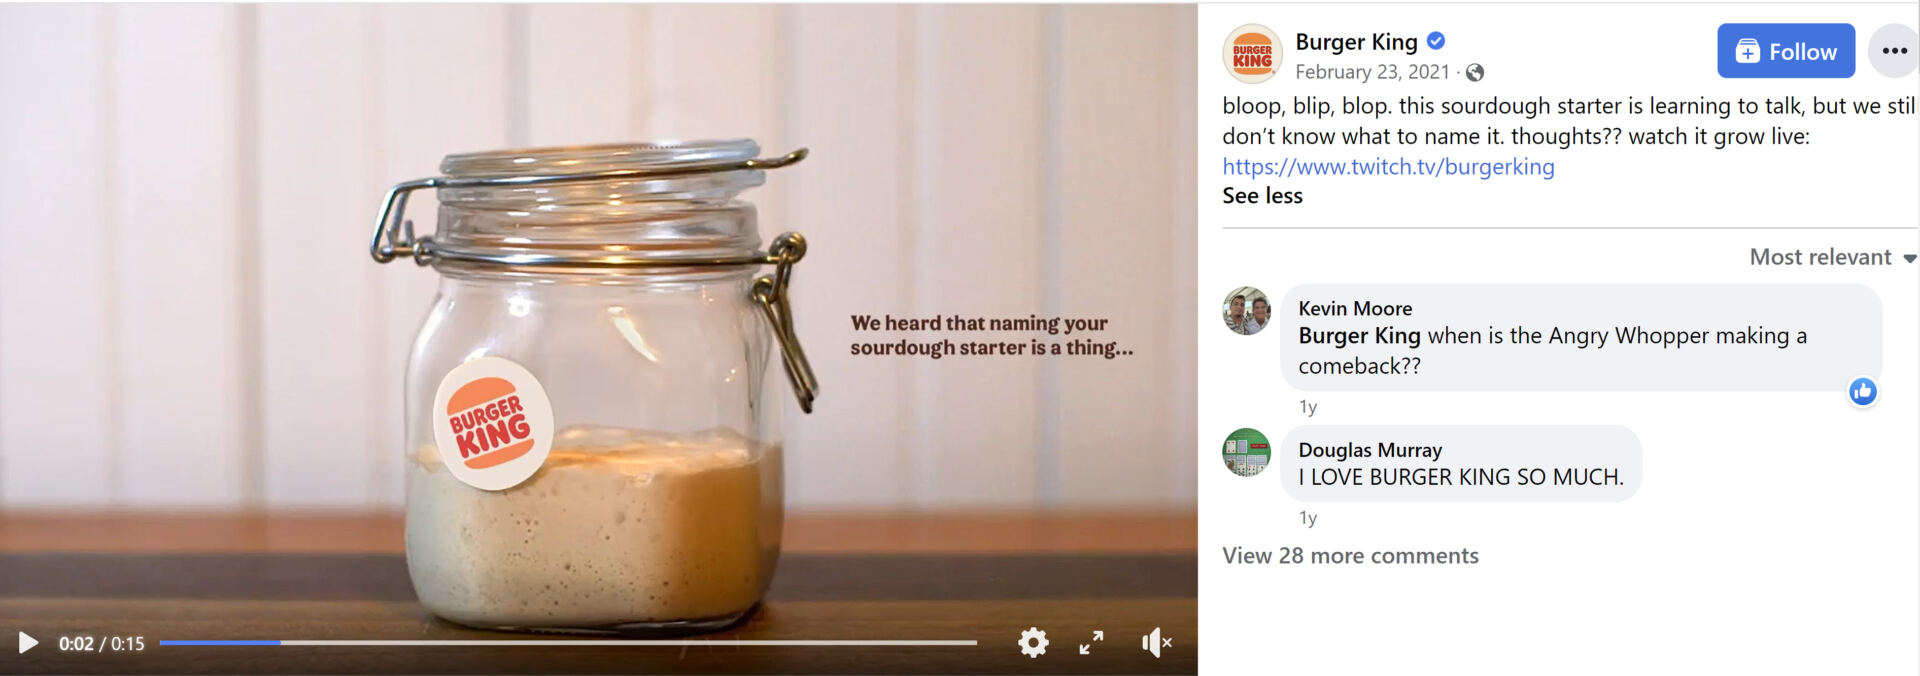 Burger King asks its Facebook followers to name a product to generate more Facebook engagement. 